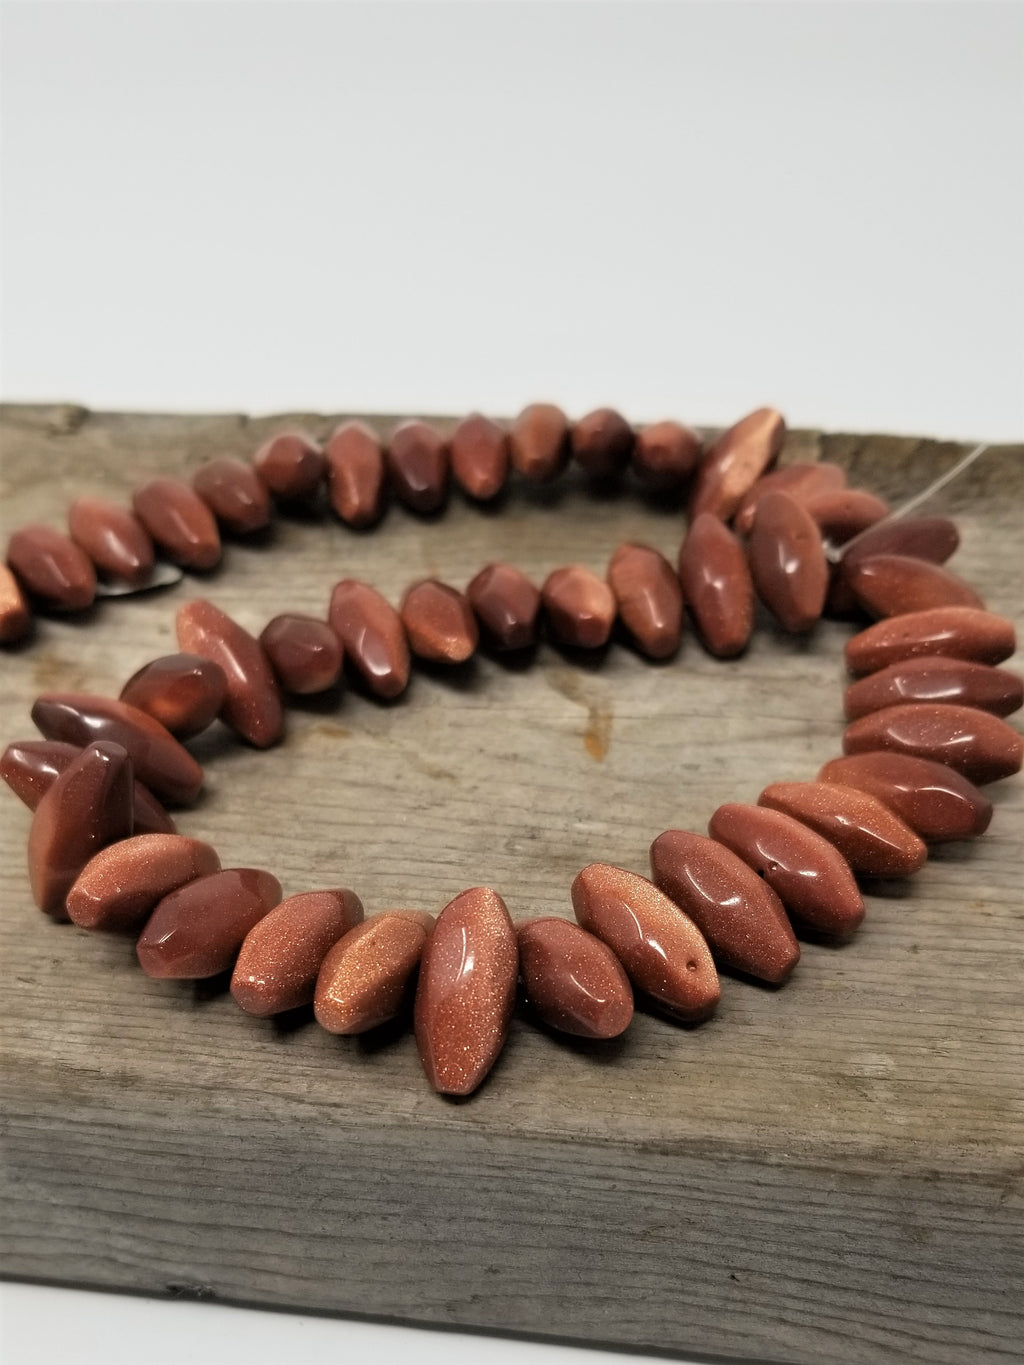 45 Stunning GoldStone 20 by 10 mm Beads Sparkling